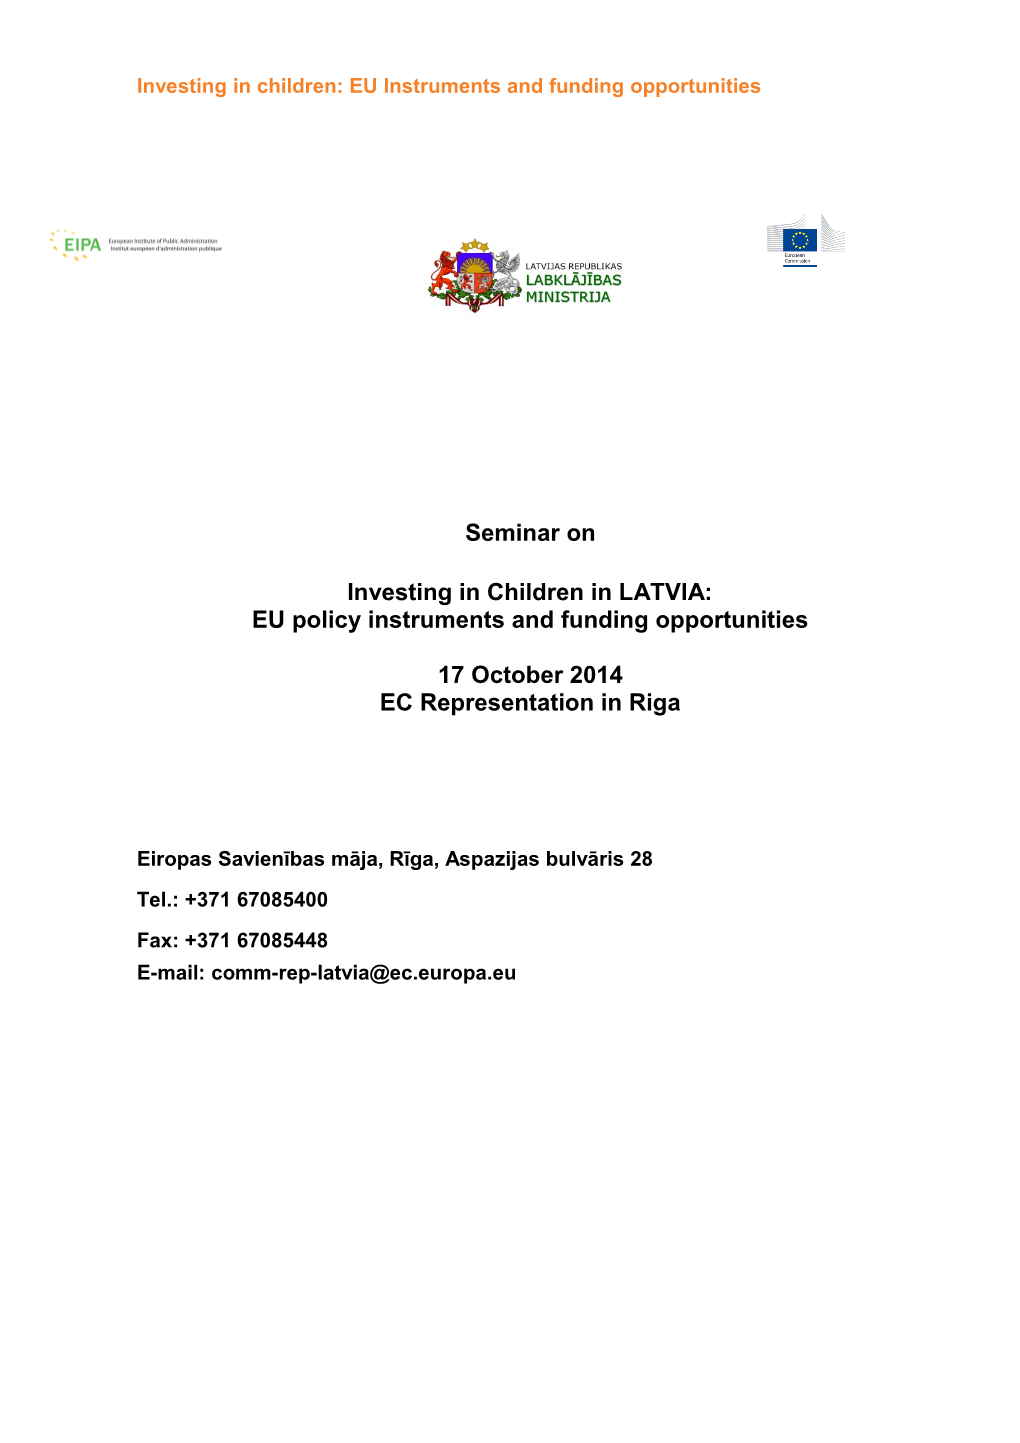 EU Policy Instruments and Funding Opportunities